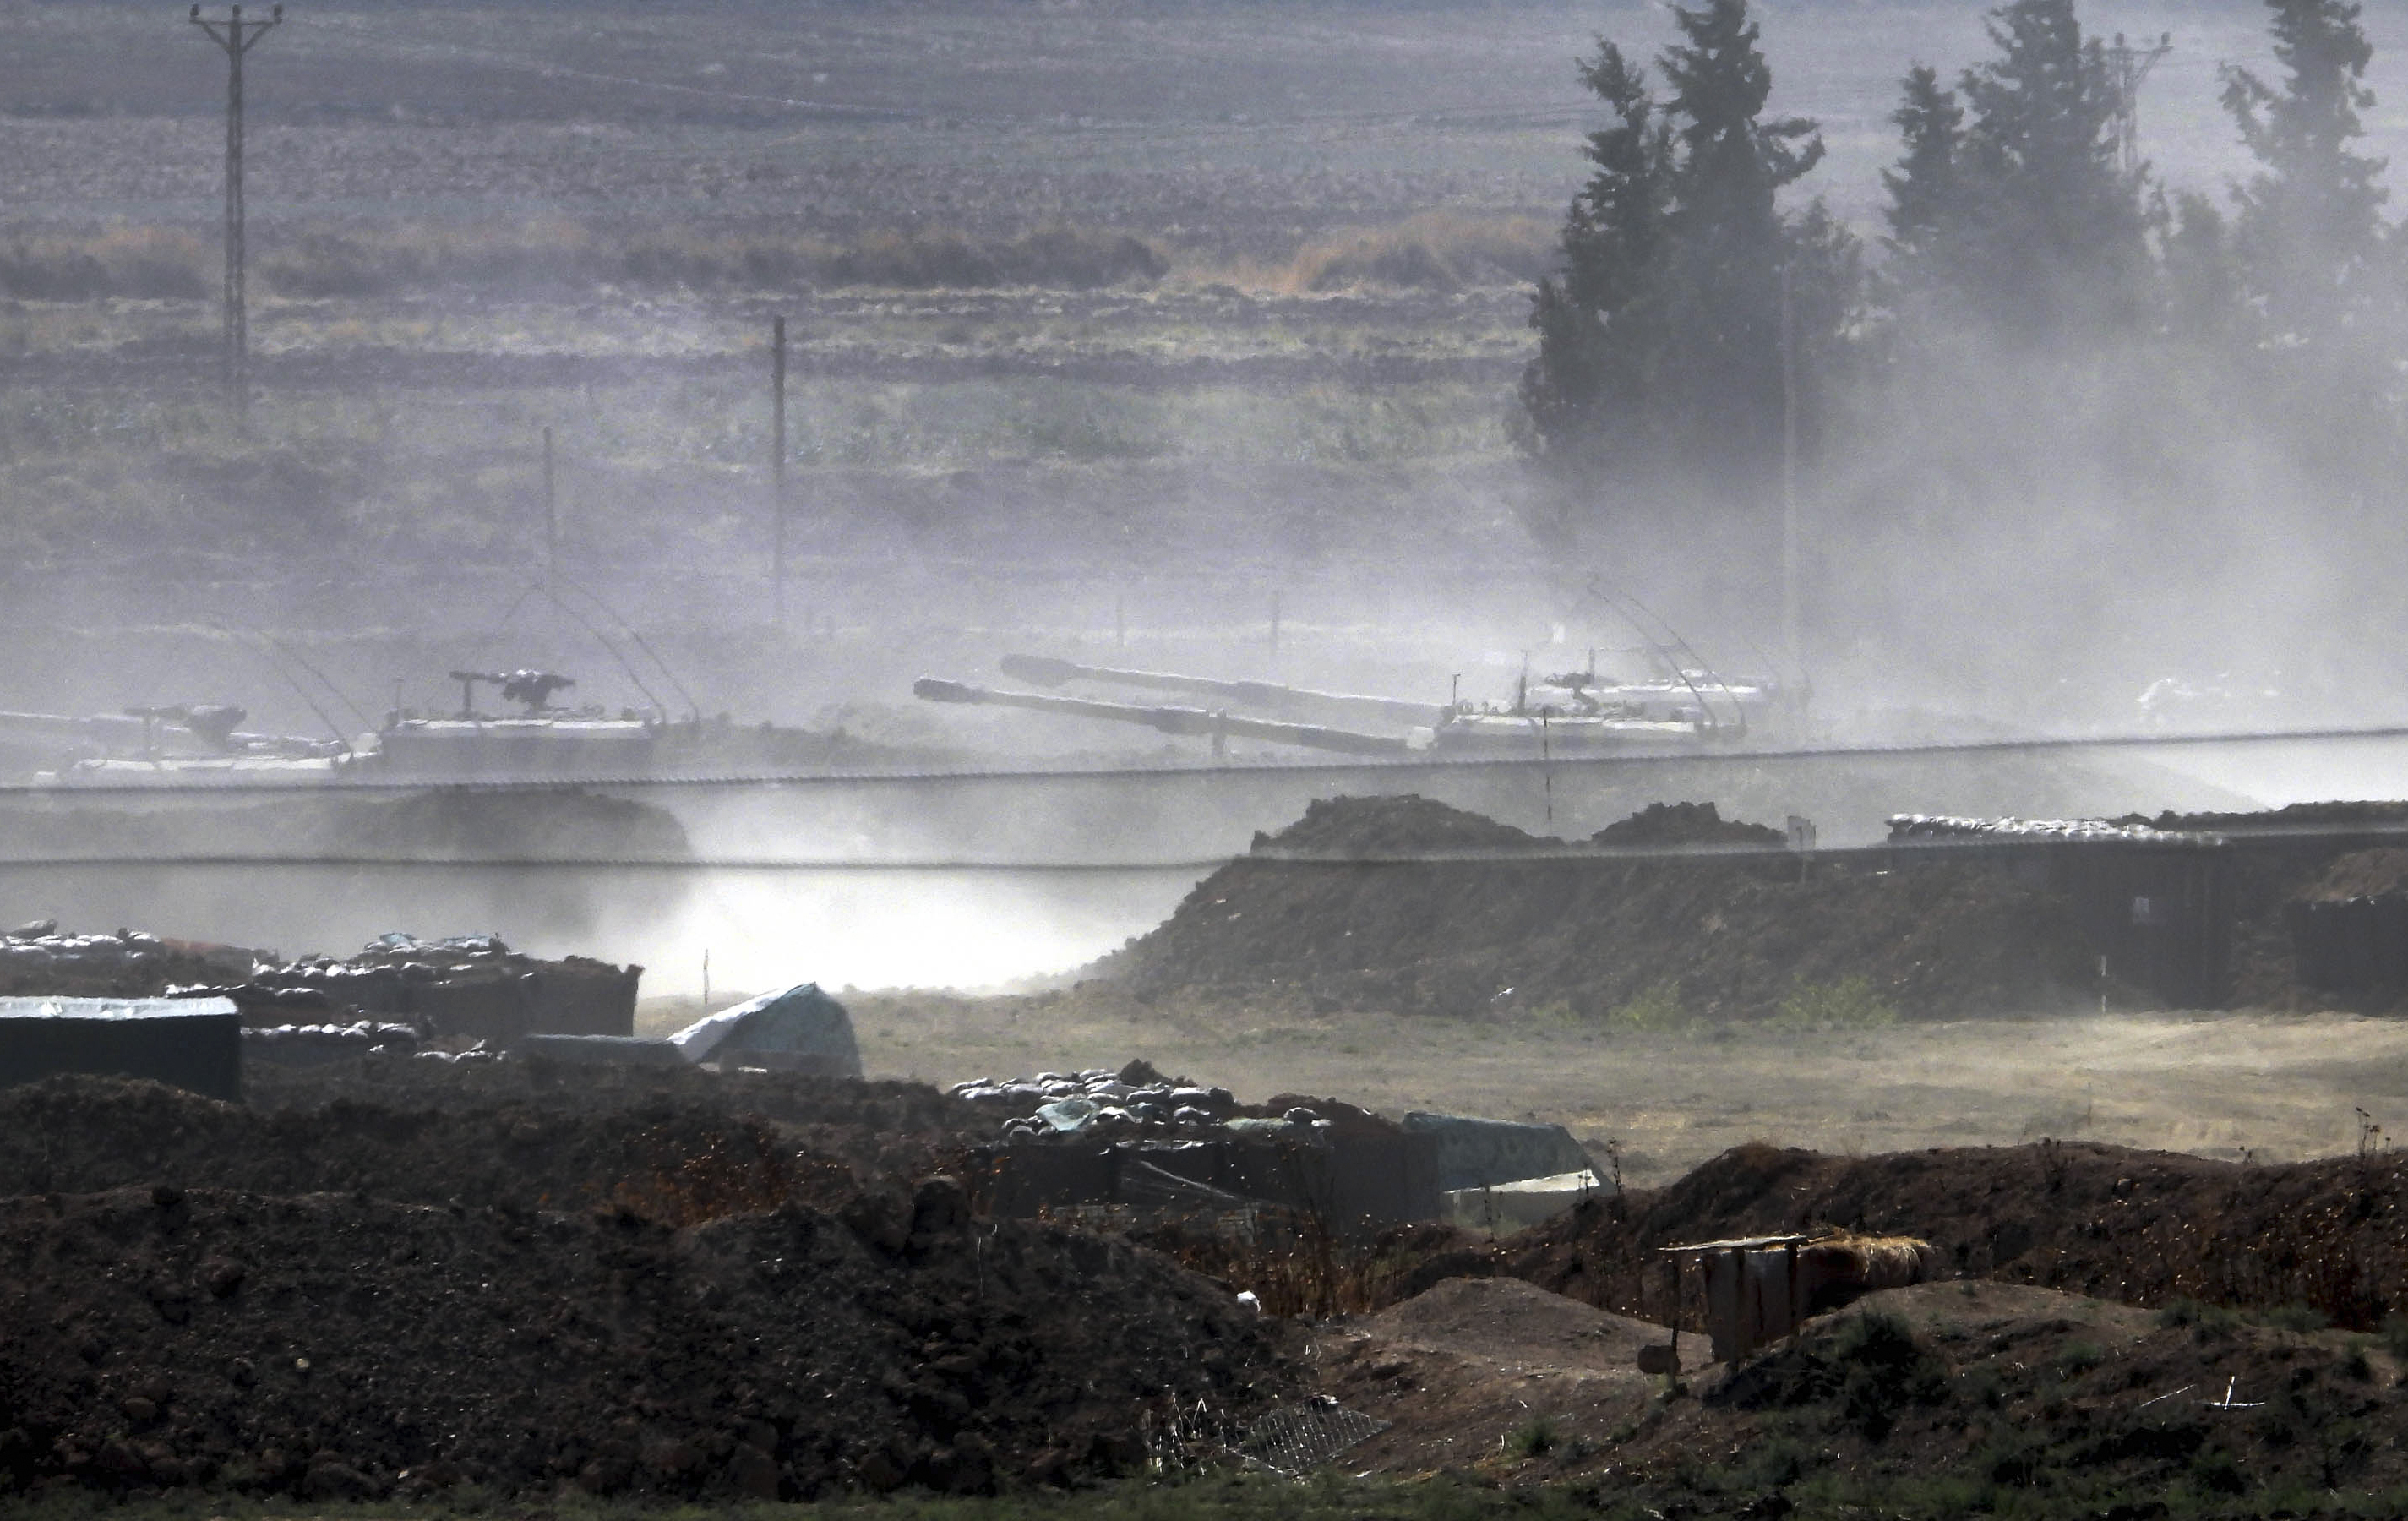 In this Sunday, Oct. 6, 2019 photo, Turkish forces artillery pieces are driven to their new positions near the border with Syria in Sanliurfa province, Turkey. U.S.-backed Kurdish-led forces in Syria said American troops began withdrawing Monday from their positions along Turkey's border in northeastern Syria, ahead of an anticipated Turkish invasion that the Kurds say will overturn five years of achievements in the battle against the Islamic State group. (DHA via AP)